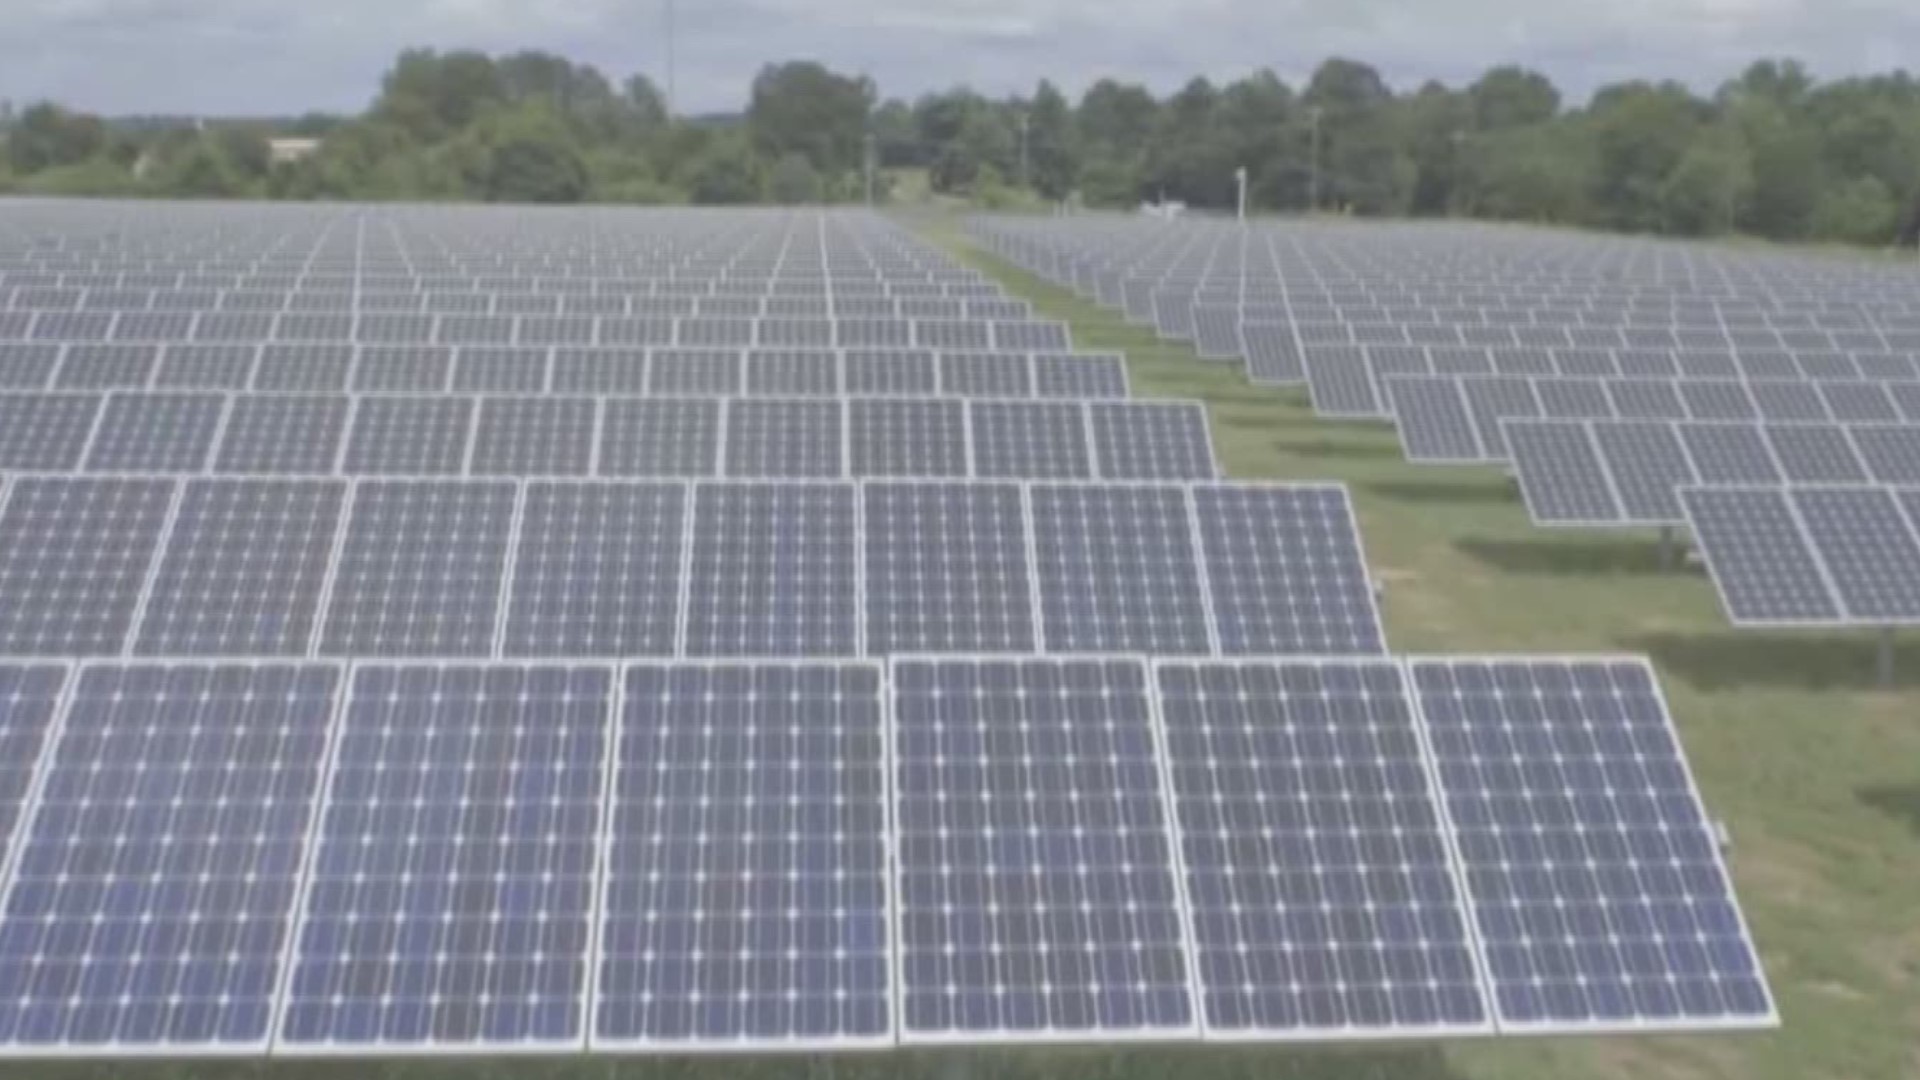 Pasquotank County looks into a Giant Solar Farm that community members hope will benefit them locally.